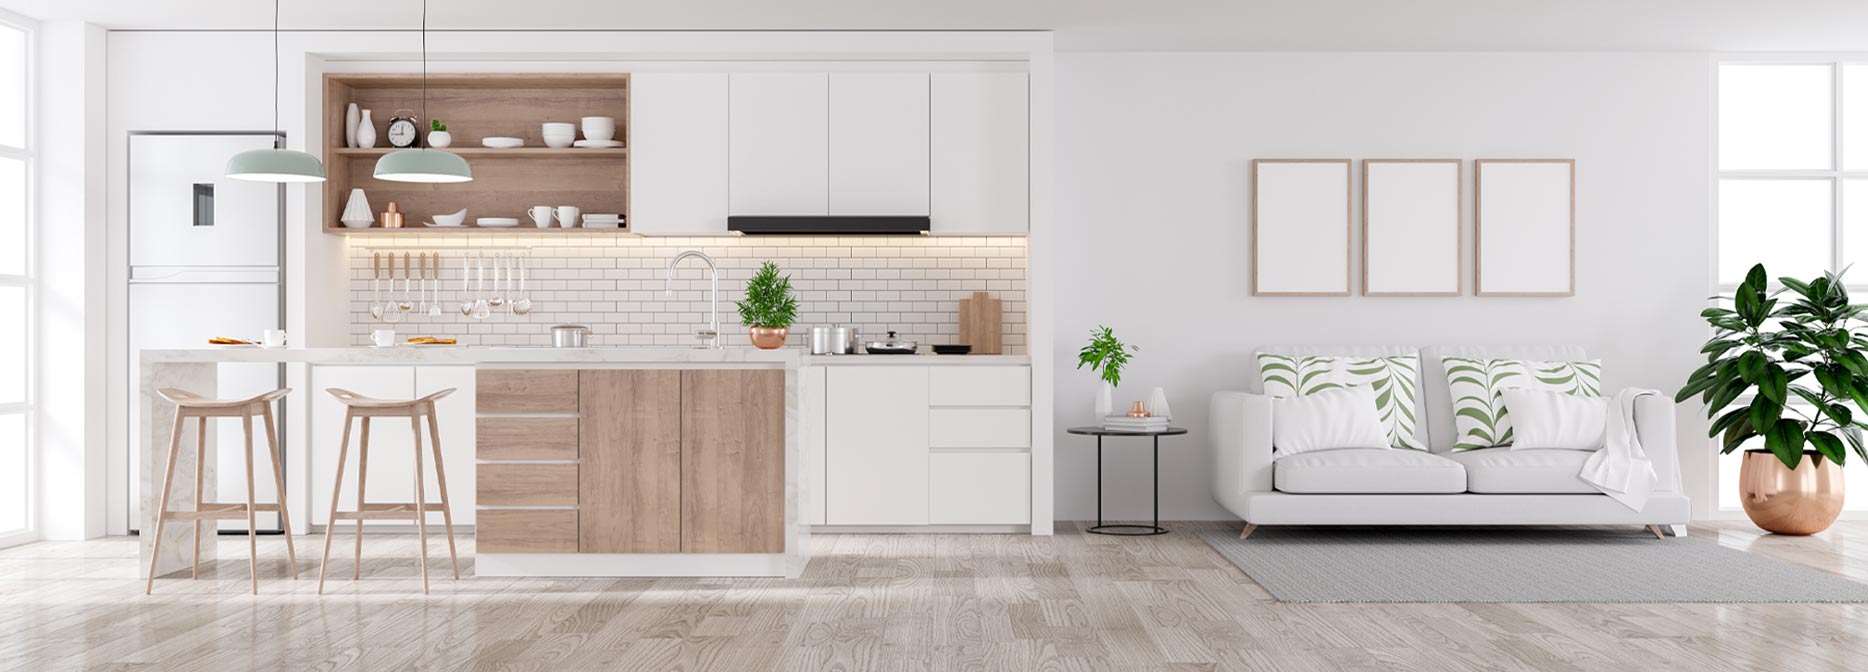 inspirational open white kitchen with wood grain features - shop all products